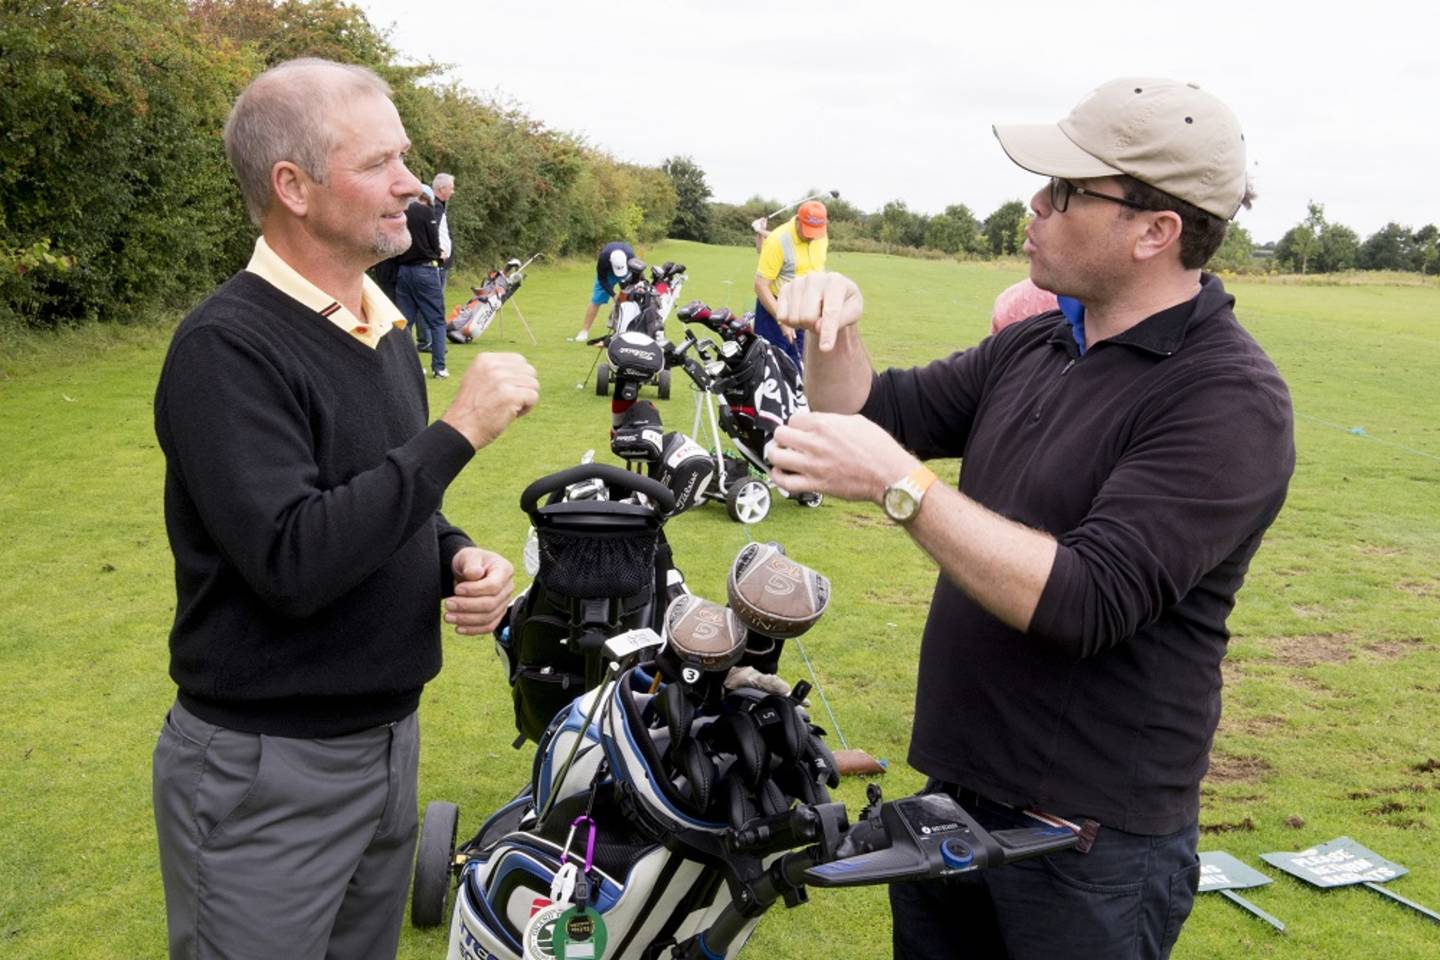 Two deaf golfers chatting while out playing a round of golf.